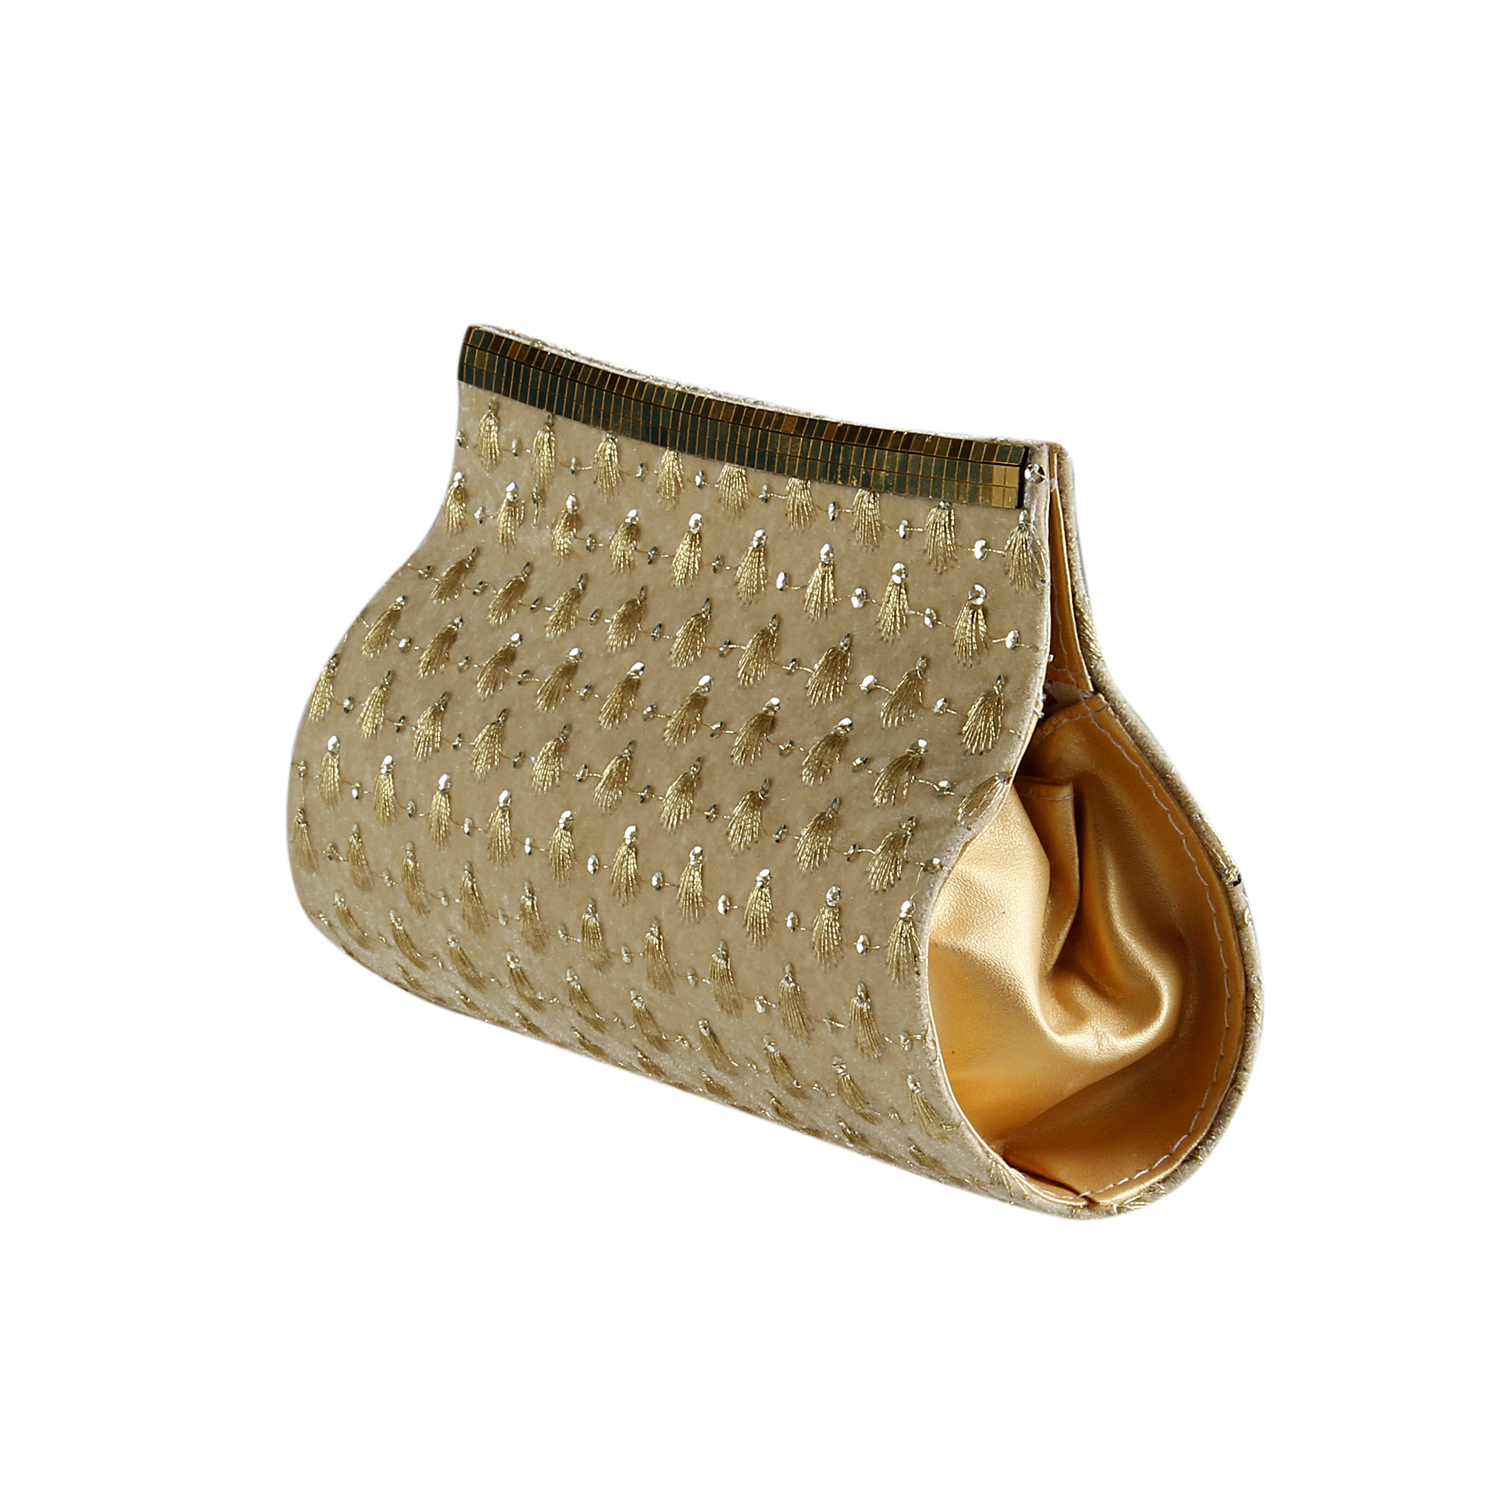 Buy Cream Cotton Clutch for Women Online @ ₹299 from ShopClues